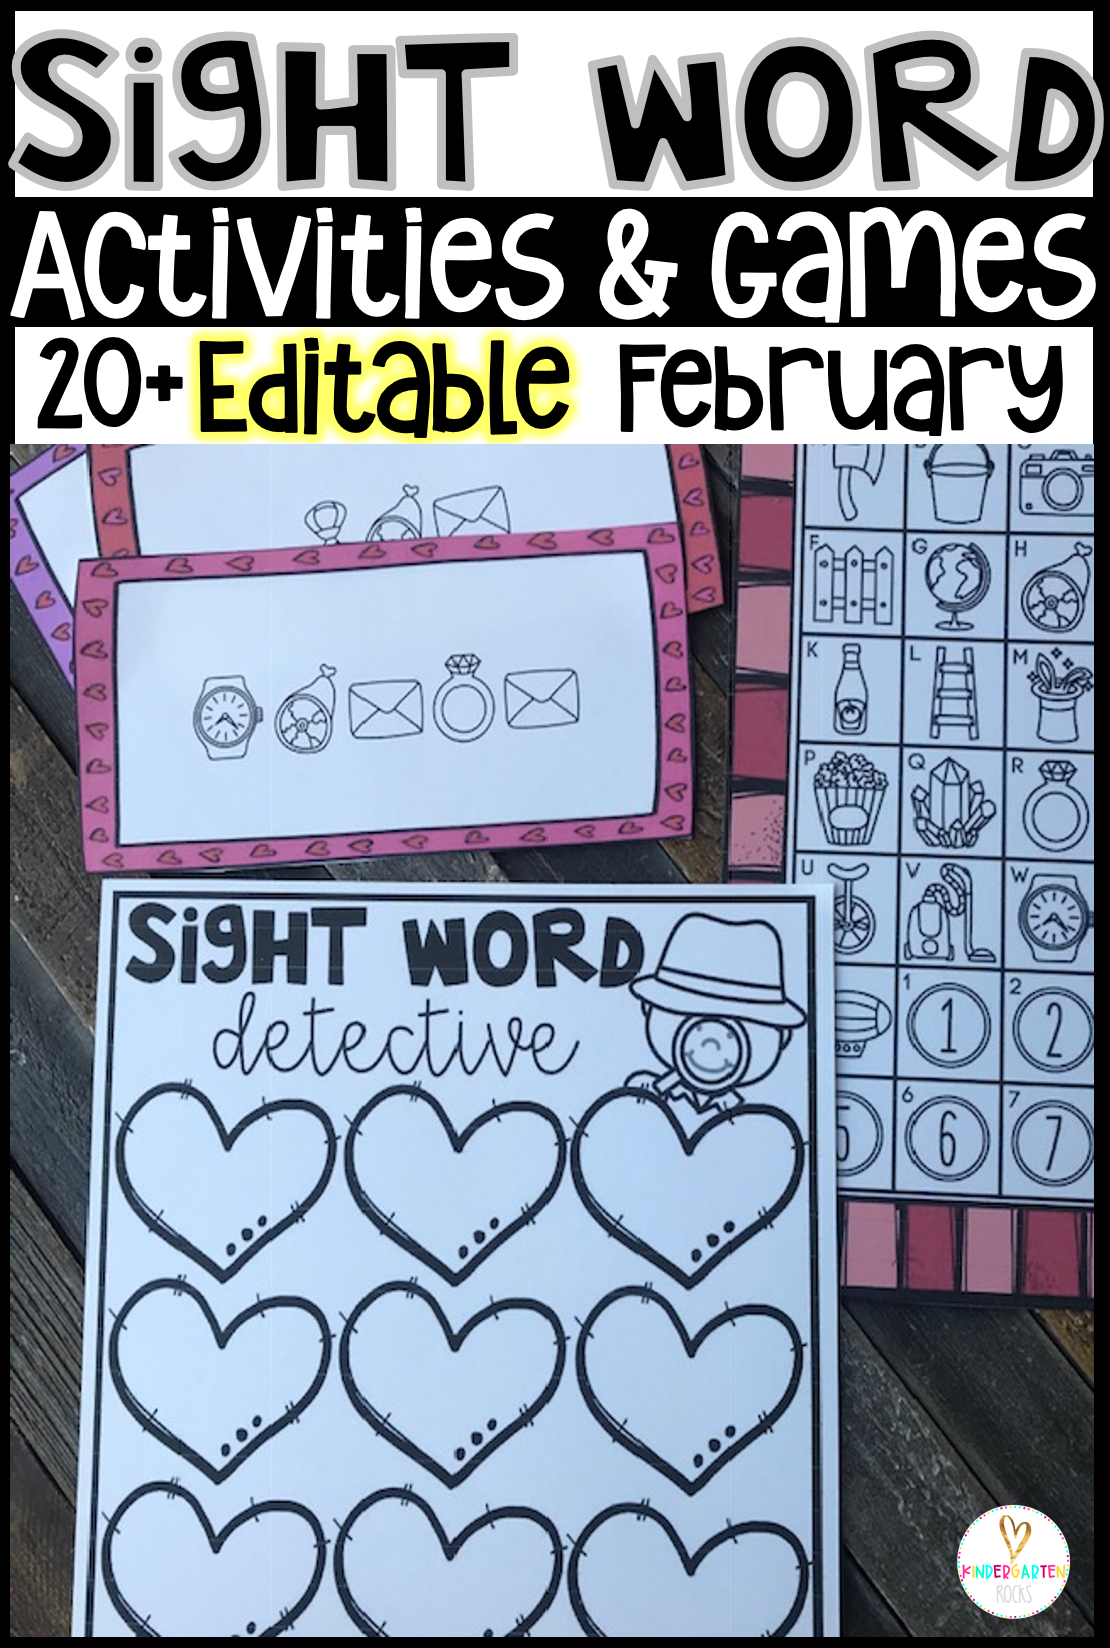 Are you looking for Valentine's Day sight word games and activities that you can change to meet the needs of your kindergarten or first grade students? Then, you will love Editable Sight Word Activities, Printables and Games for February. Type in 20 sight words on one list and they will spread throughout all of the activities.